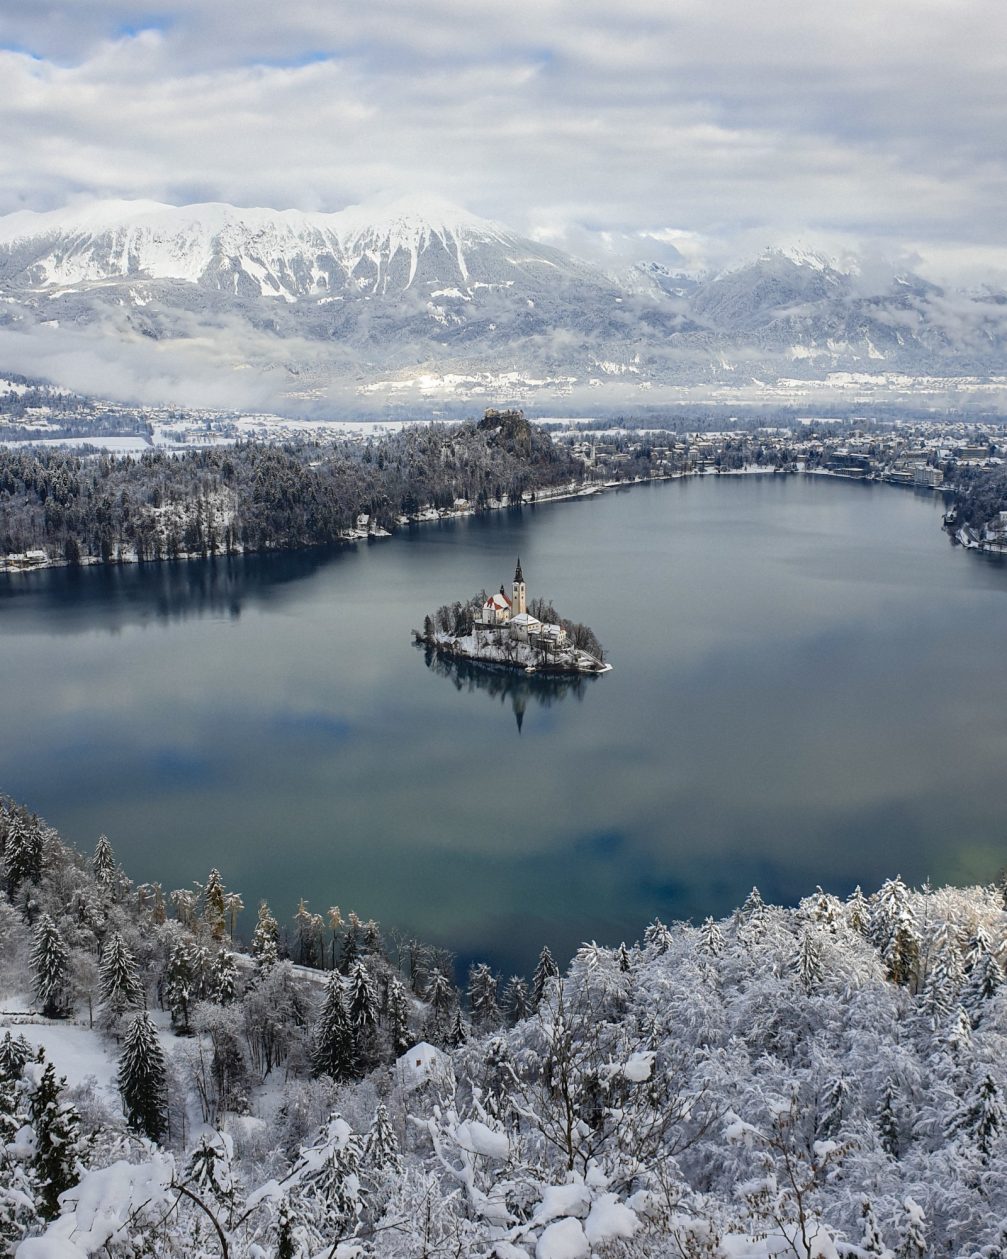 View of Lake Bled with its island with a church and clifftop castle in winter